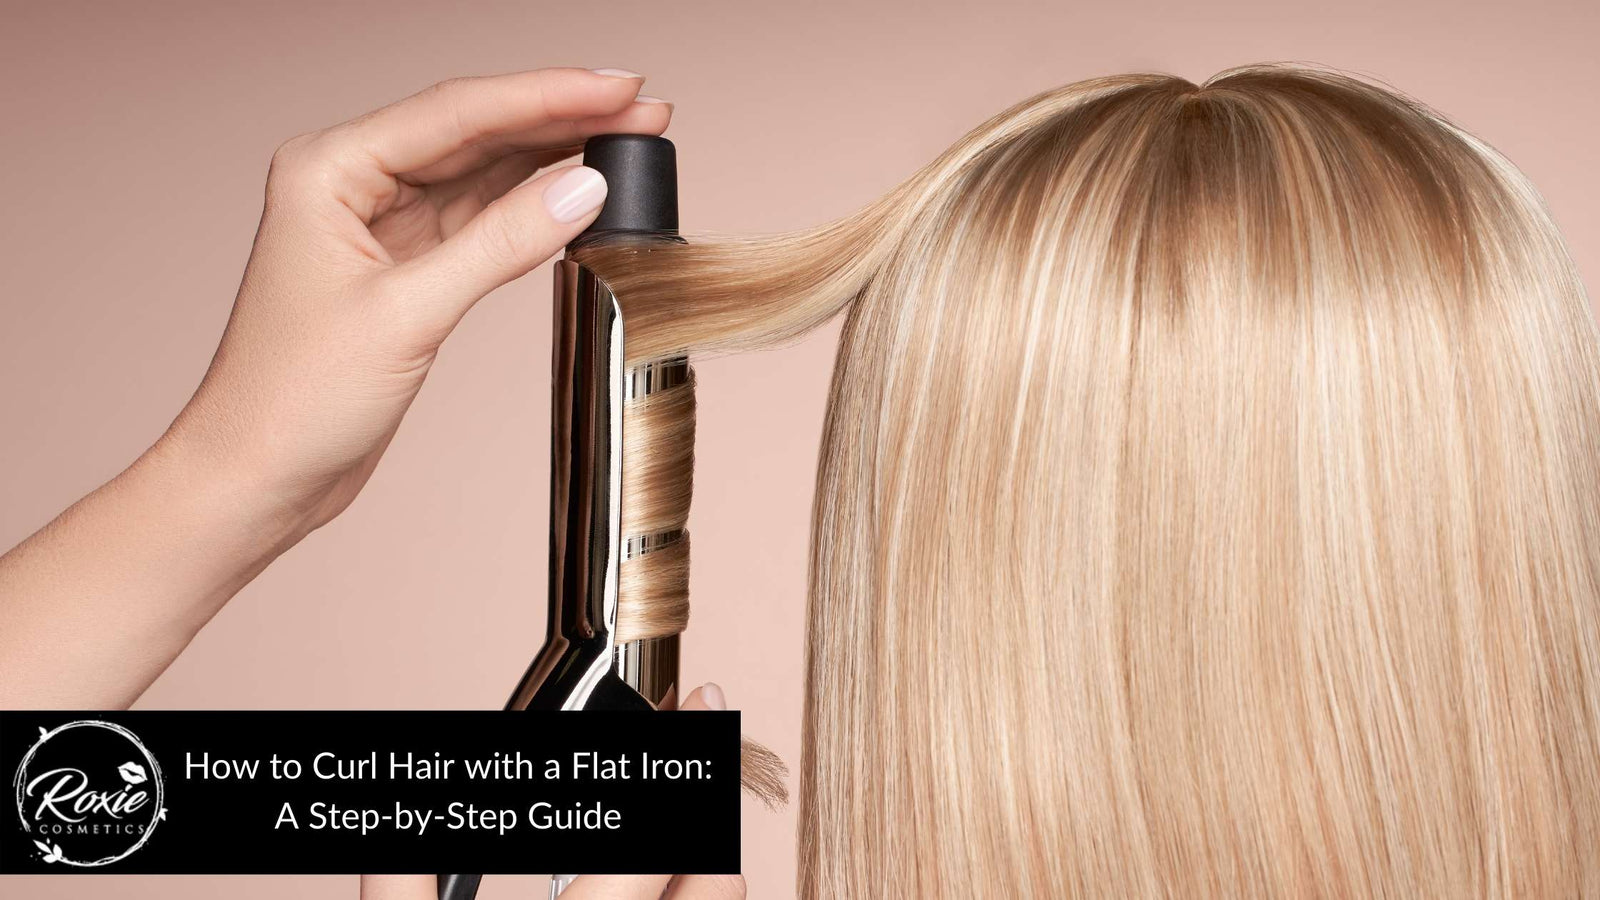 How to Curl Hair with a Flat Iron